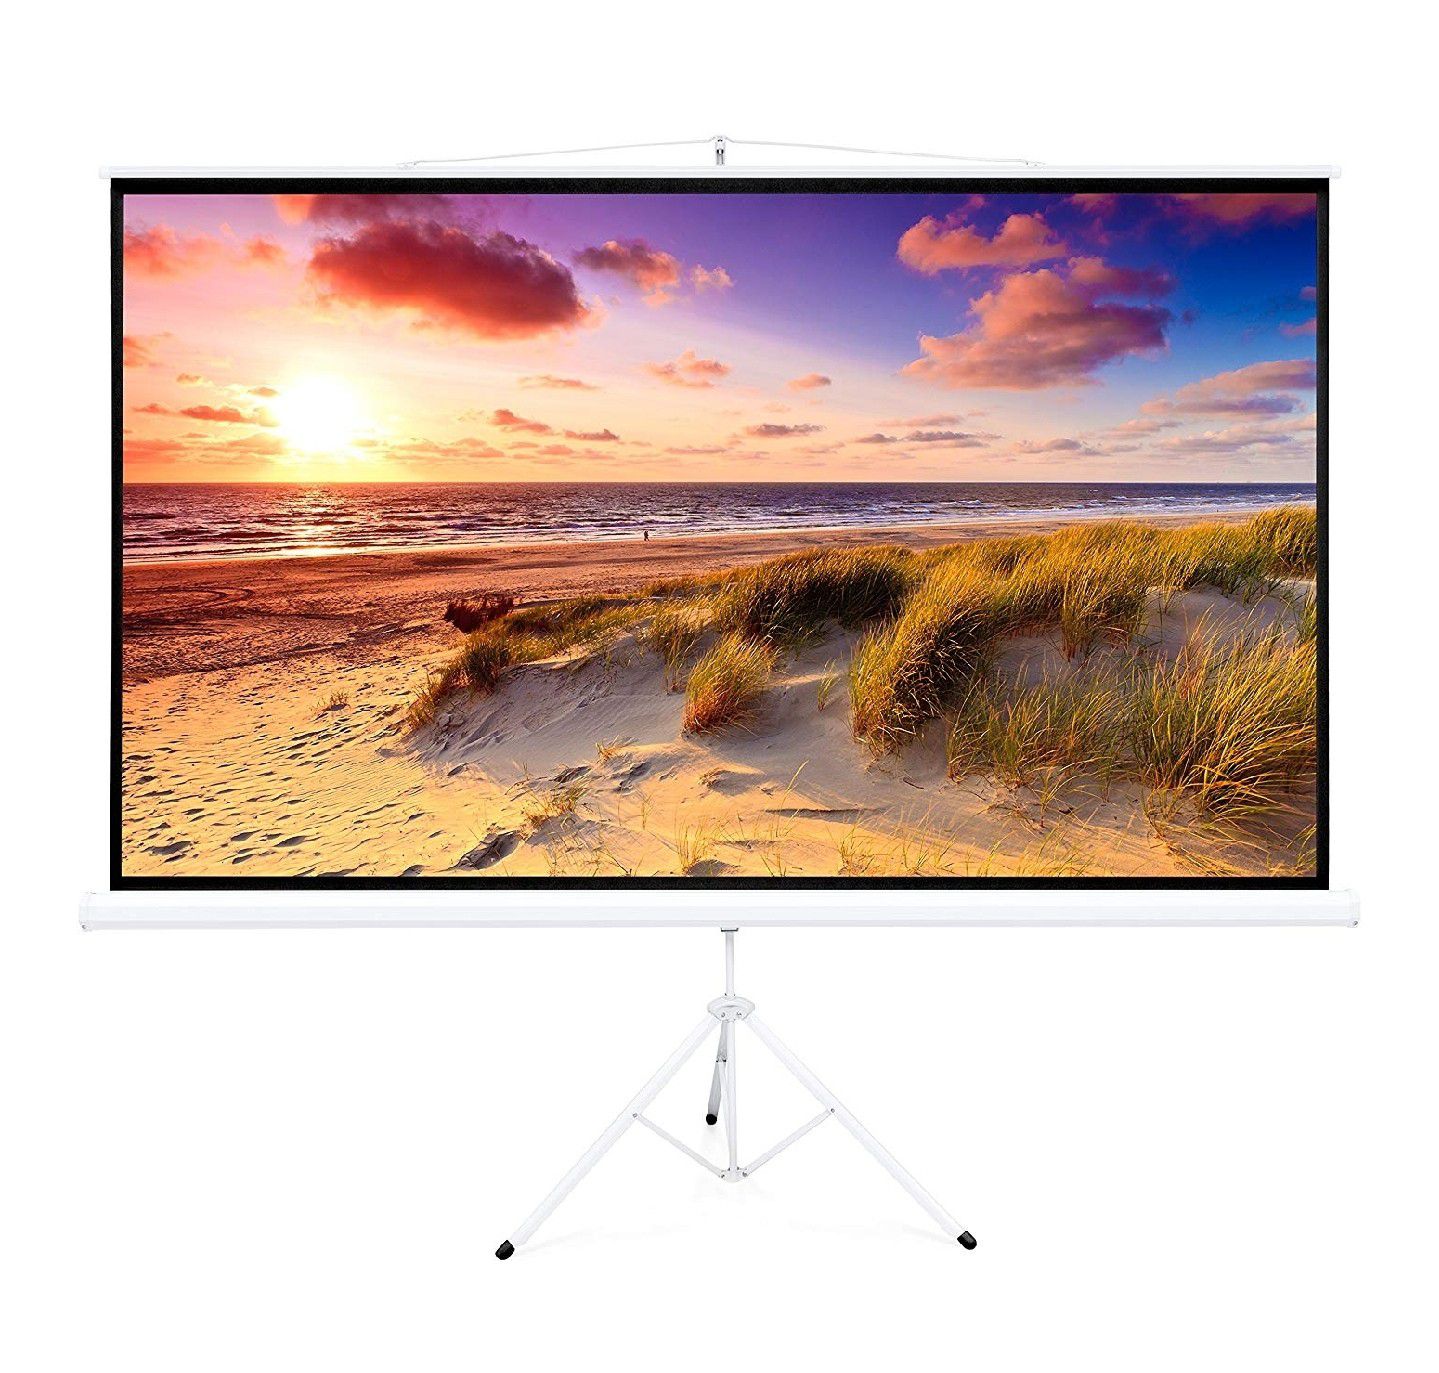 100in Portable 16:9 Projection Screen w/ 87x49in Foldable Stand, 1.3 Gain - White